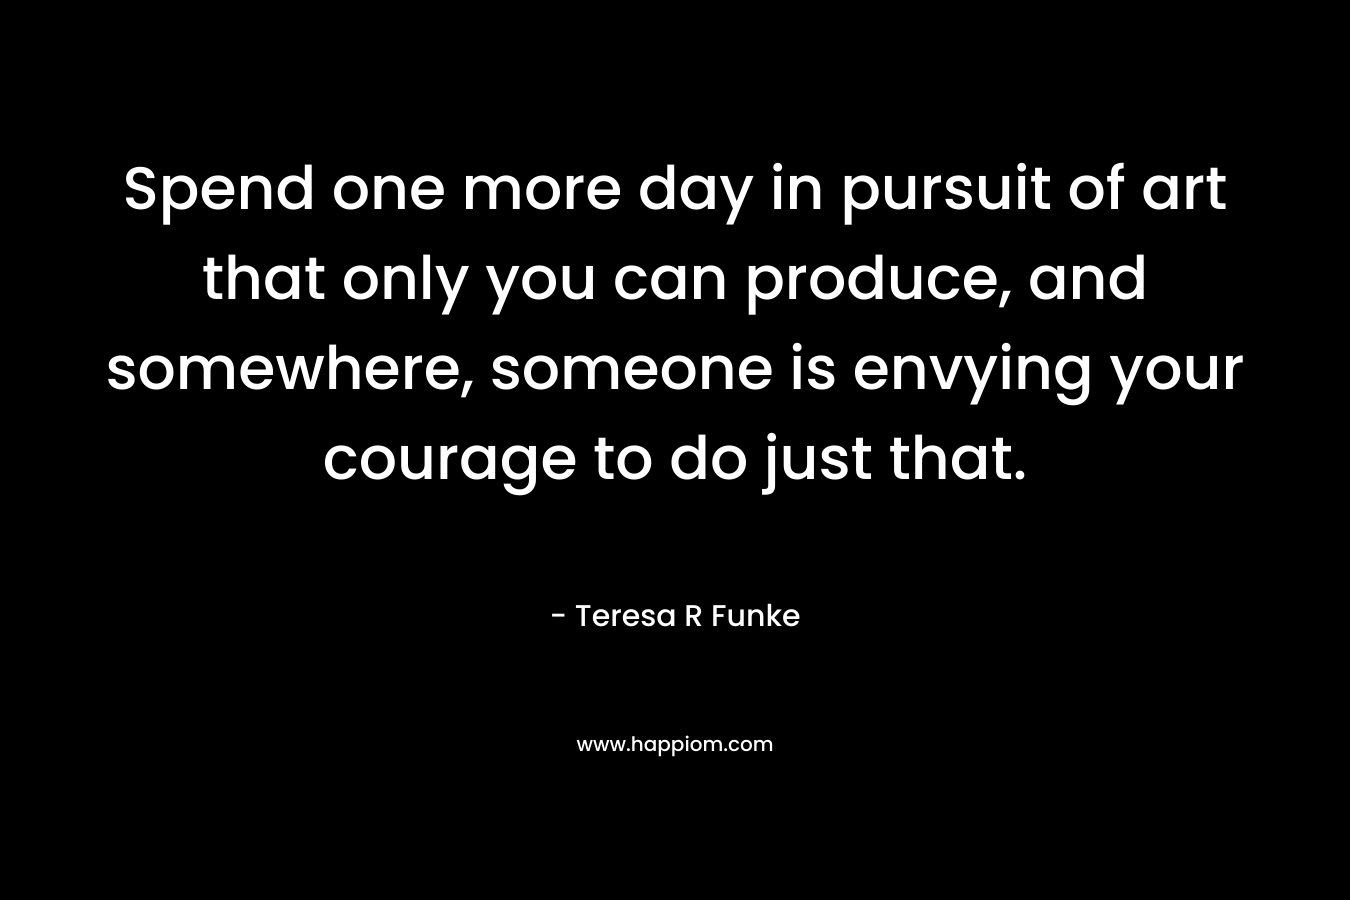 Spend one more day in pursuit of art that only you can produce, and somewhere, someone is envying your courage to do just that. – Teresa R Funke